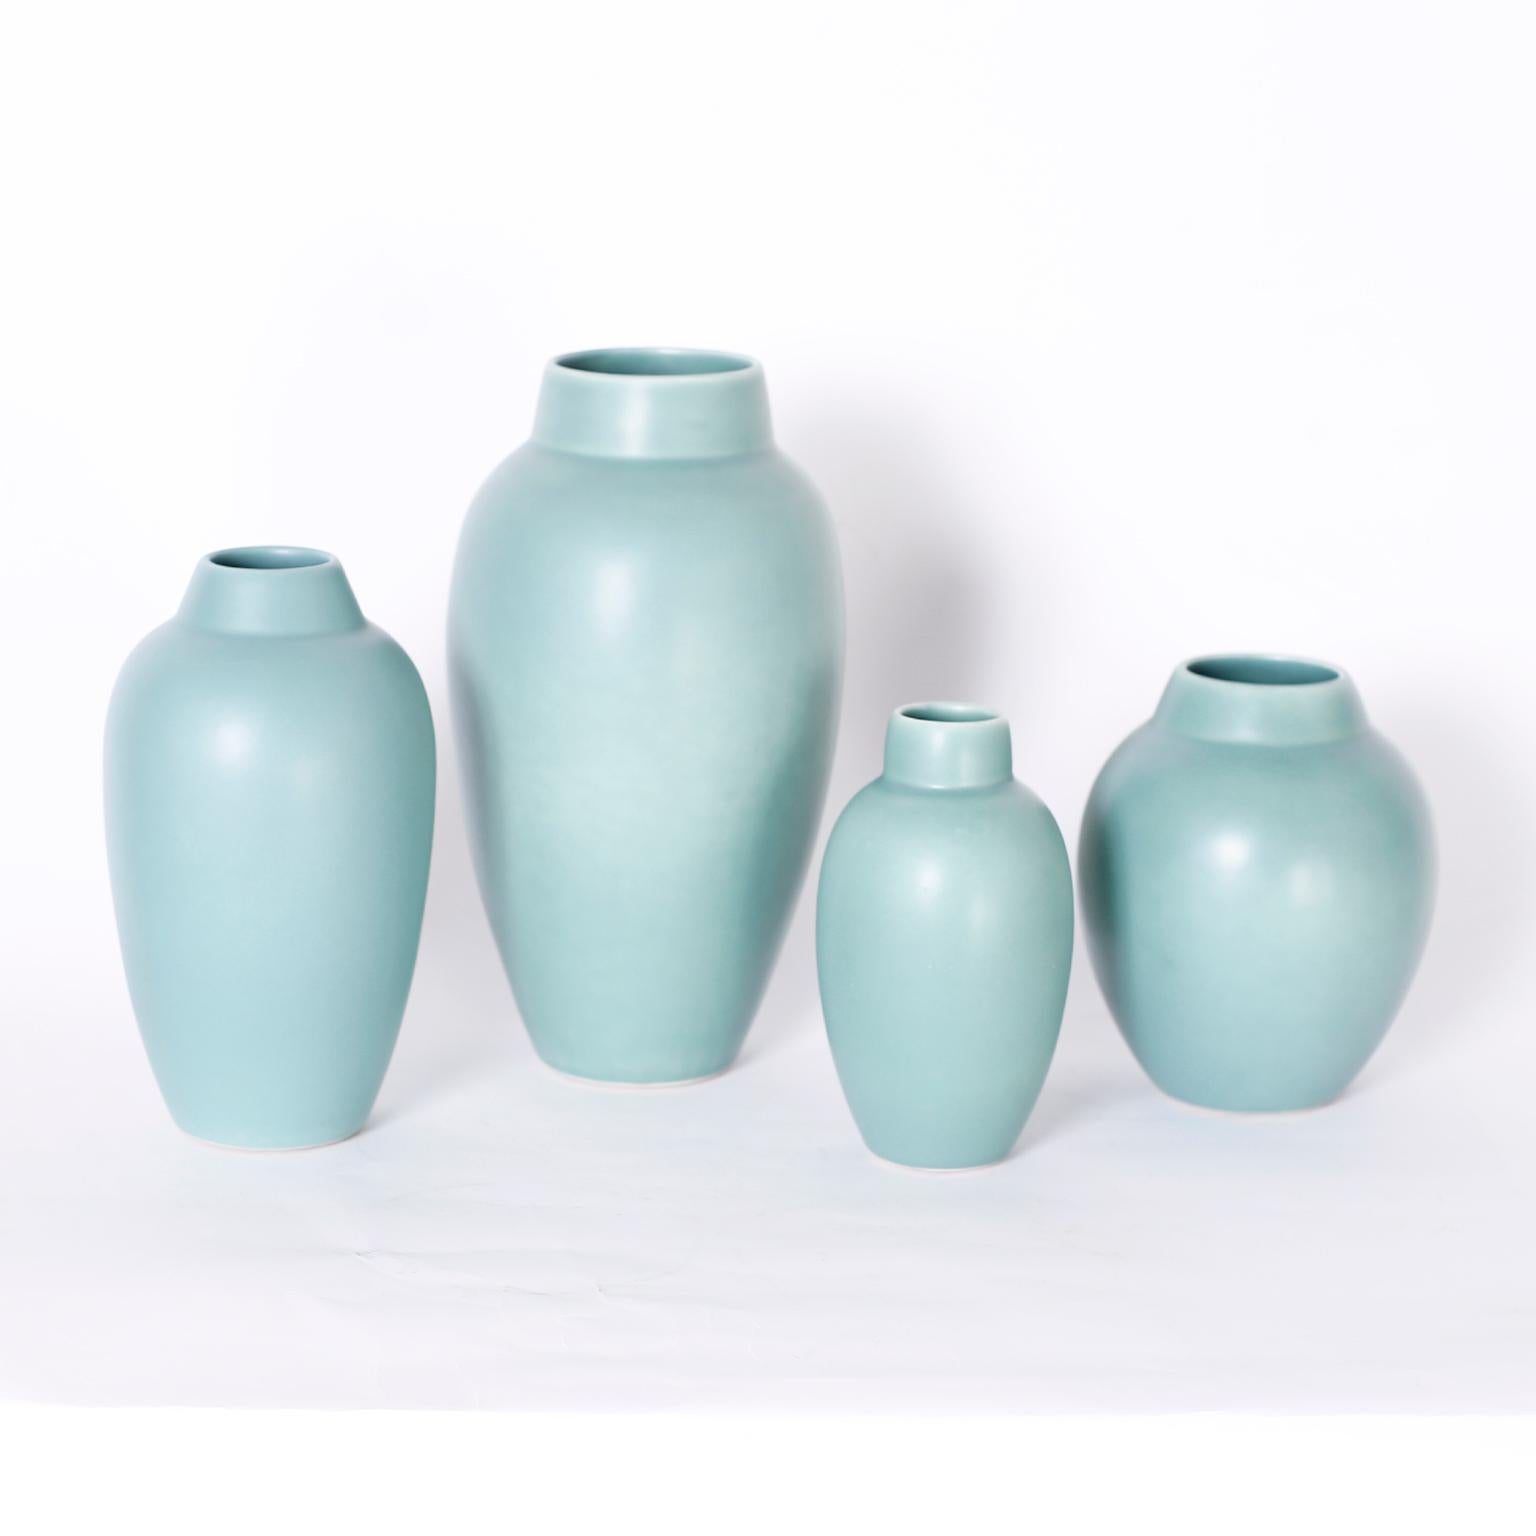 Collection of four art pottery vases with classic modern form and an alluring matte green glaze. Signed on the bottom Bella Vase Venice California. 

From left to right:

H: 10 DM: 5.5
H: 13 DM: 7
H: 7.5 DM: 4
H: 8 DM: 6.